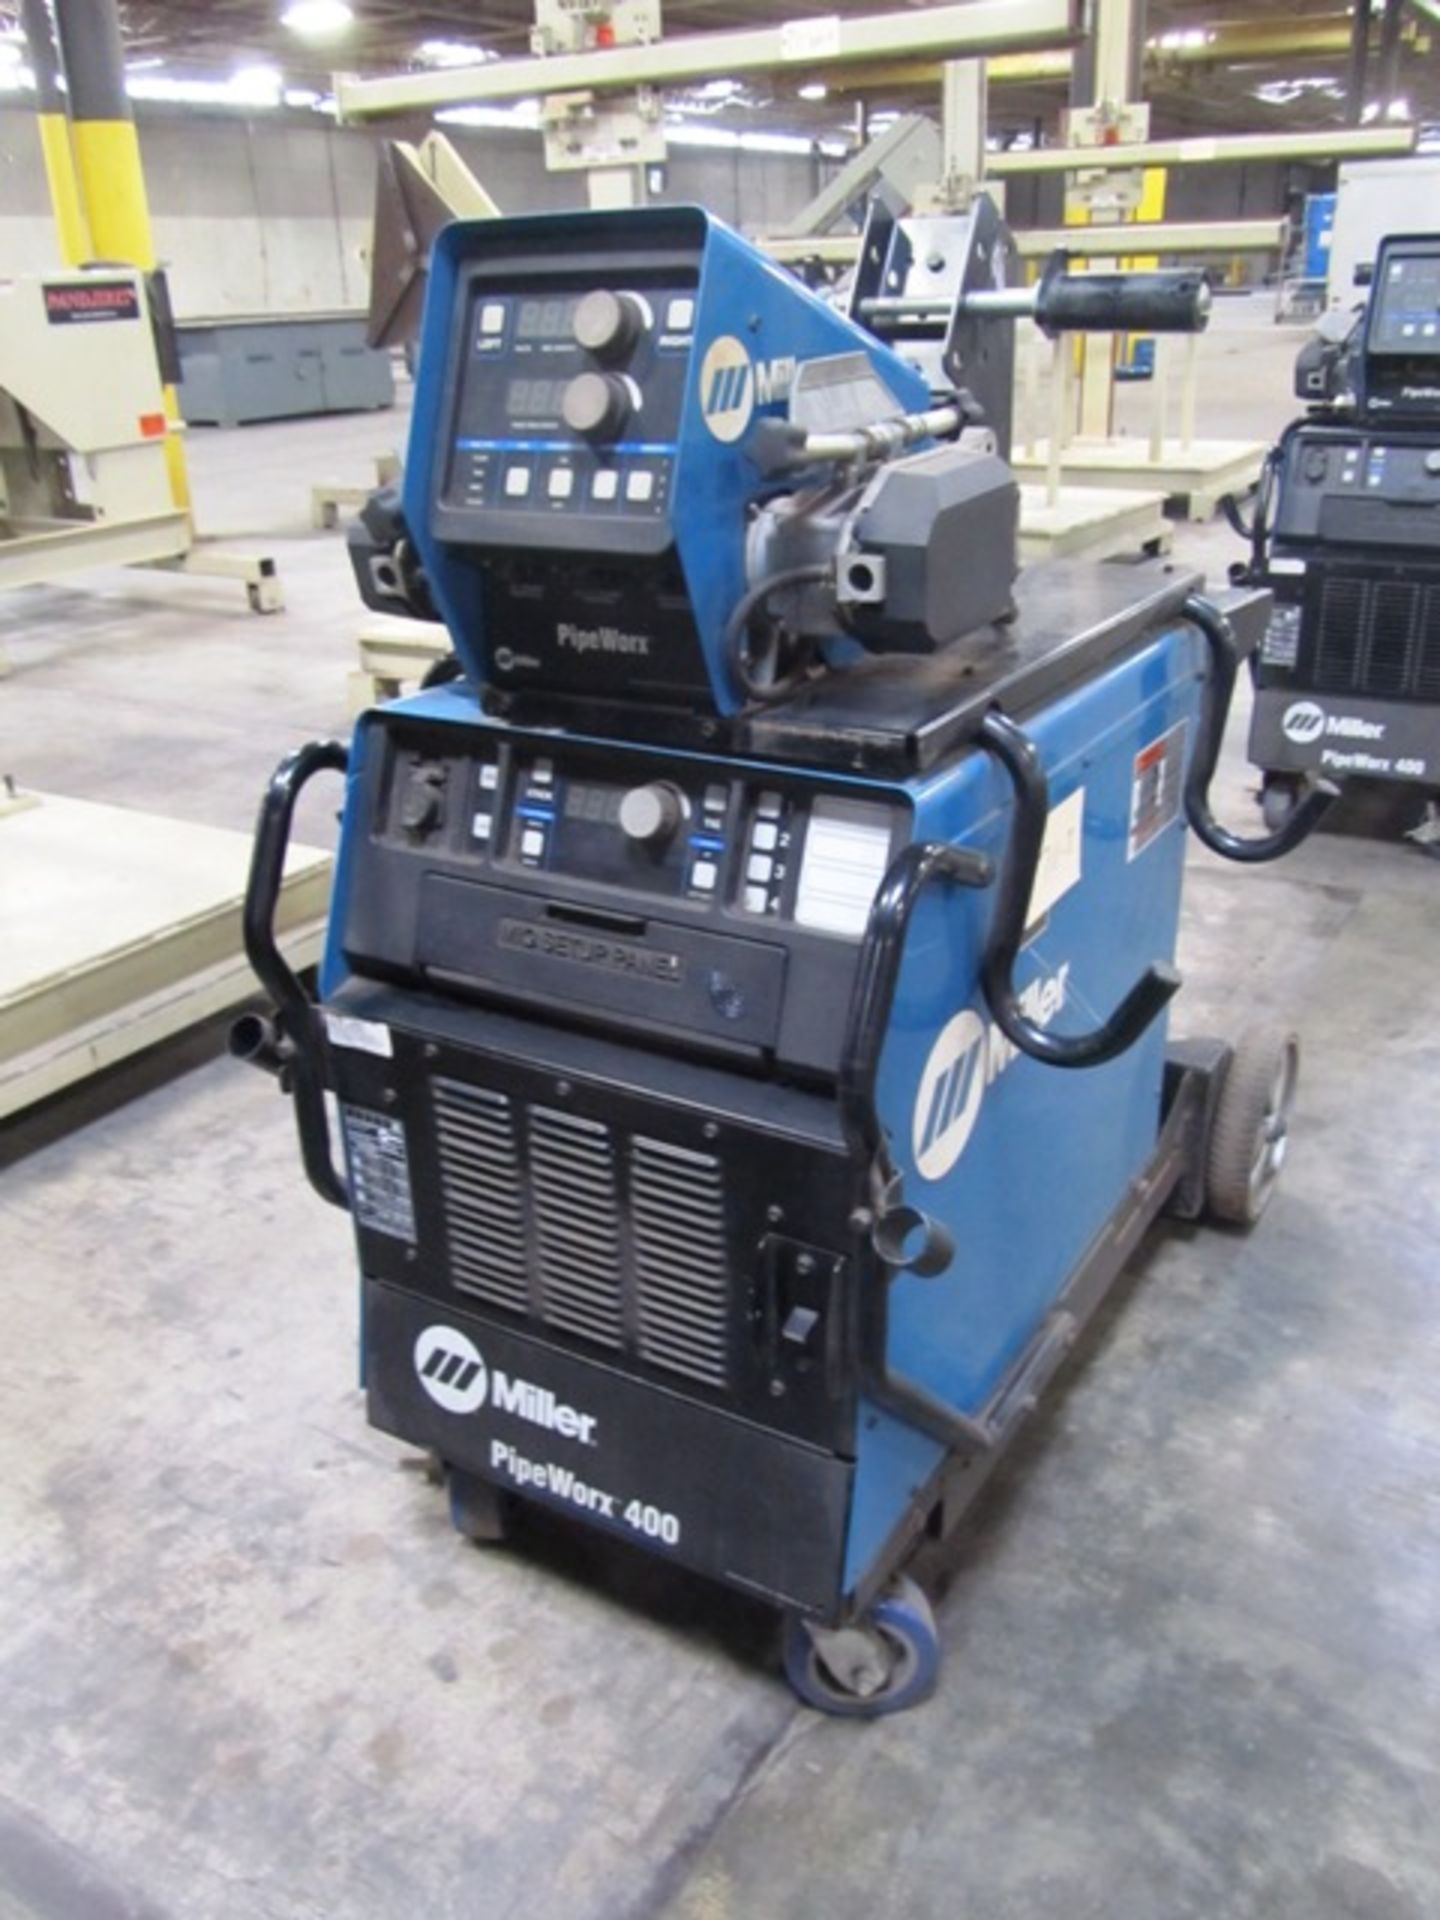 Miller Pipeworx 400 Portable Welder with Pipeworx Dual Wire Feeder, sn:MD110434G